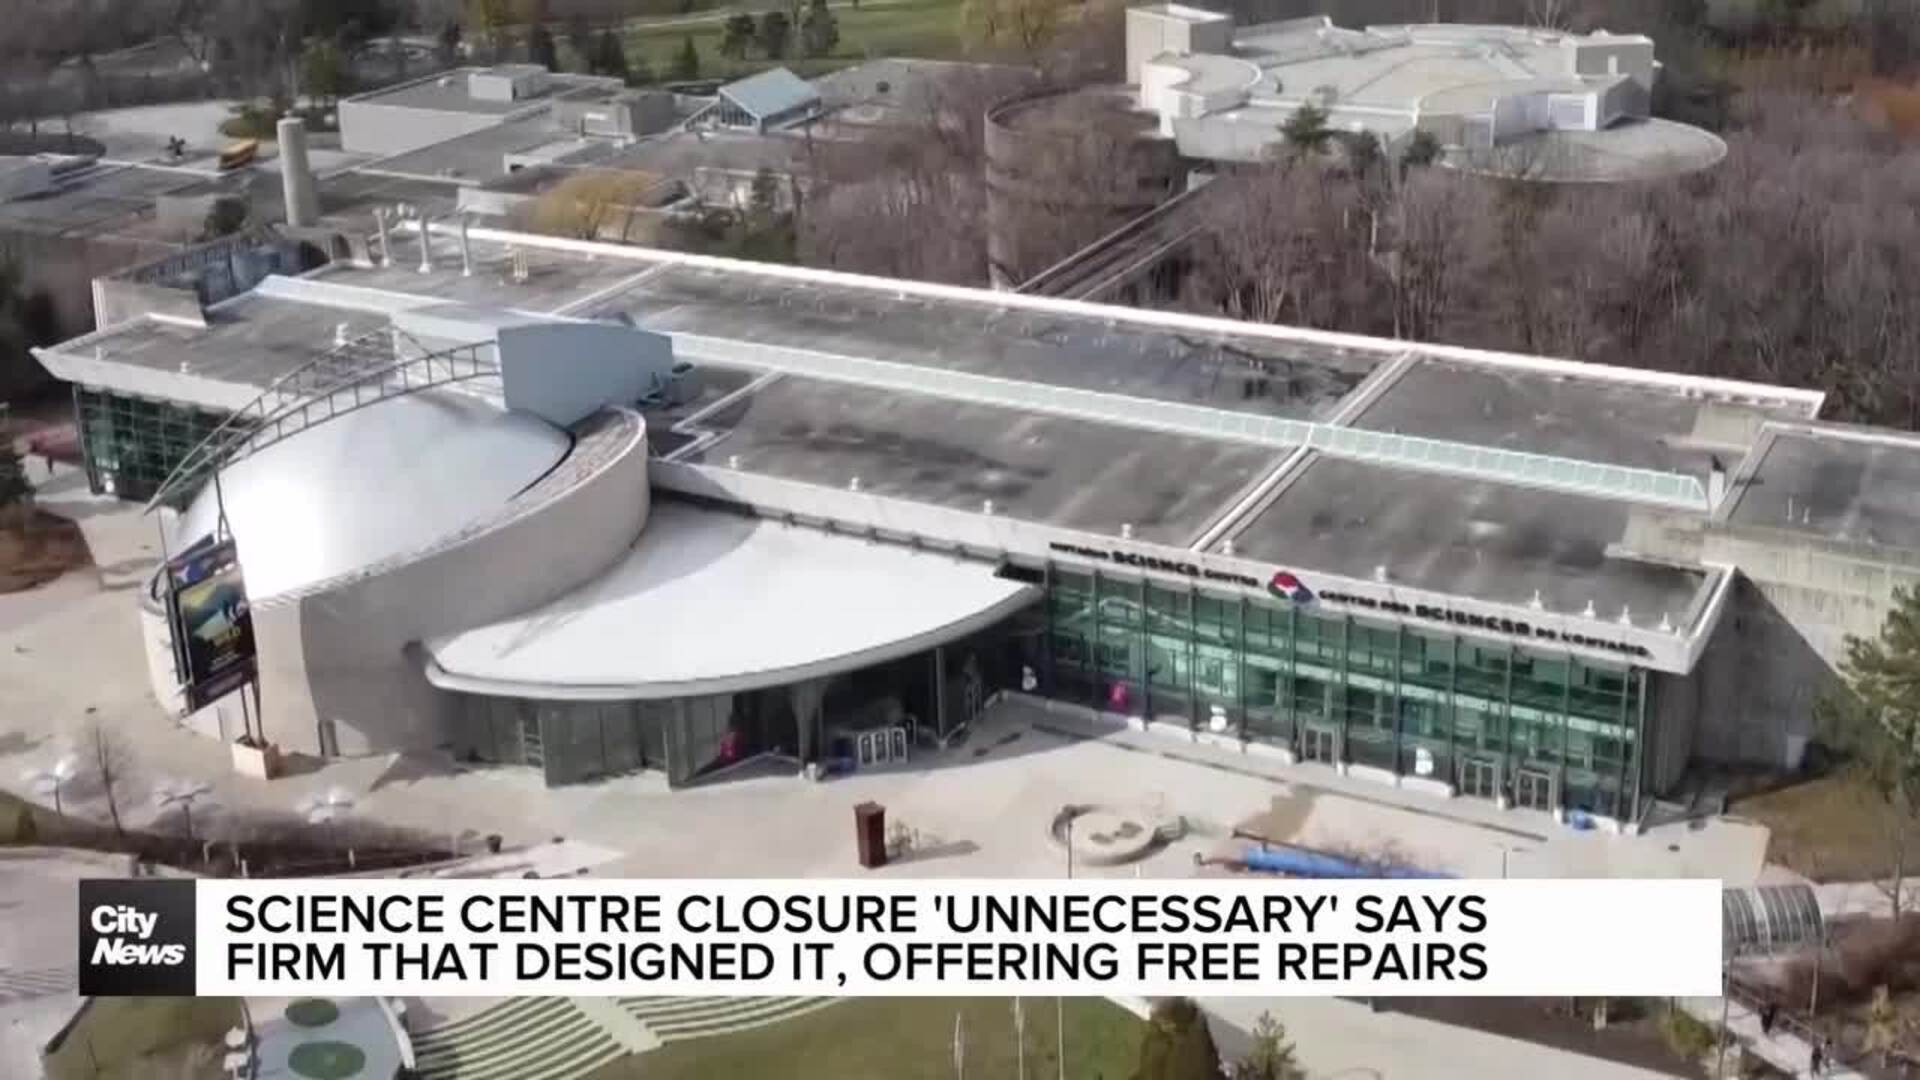 Science centre closure “unnecessary” says firm that designed it, offering free repairs